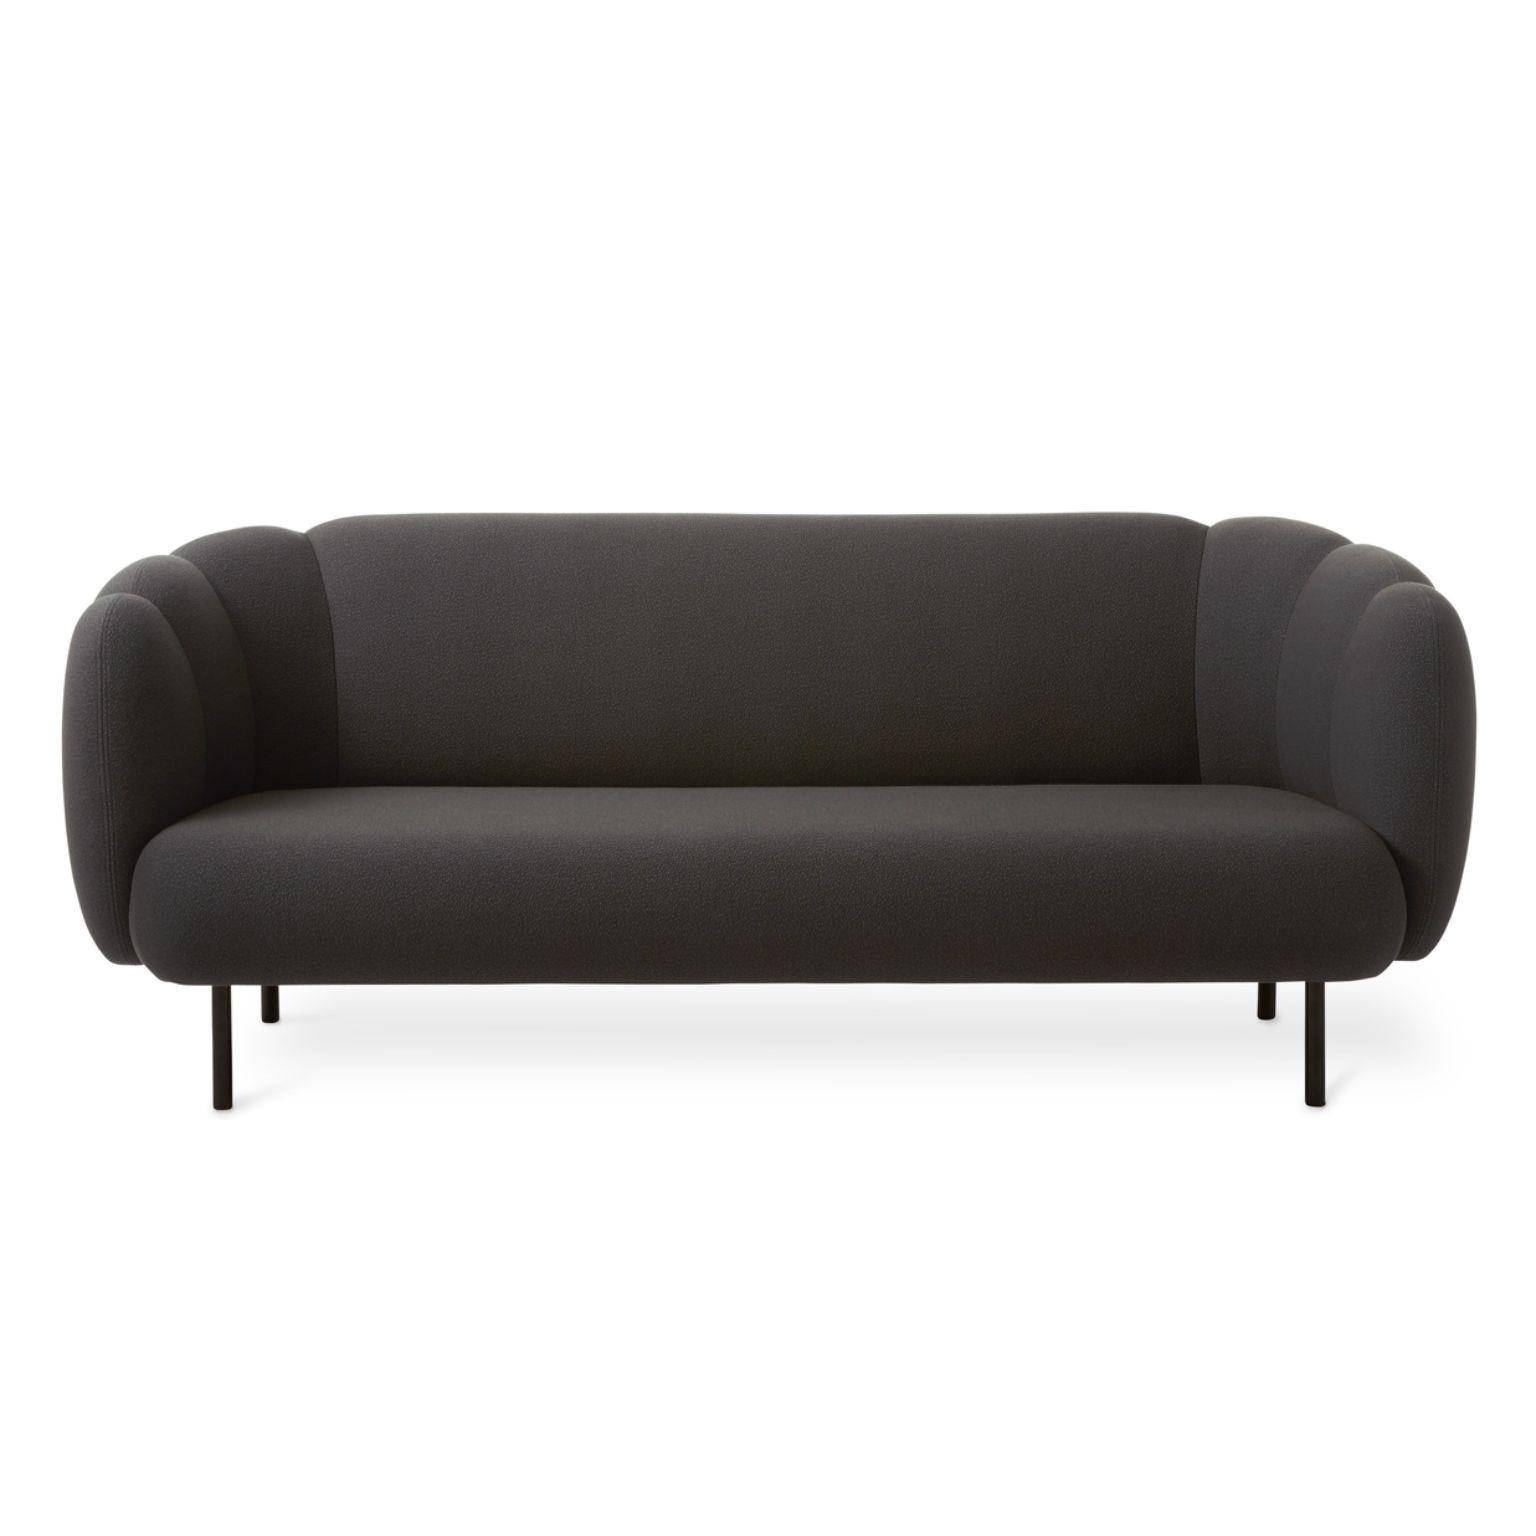 Caper 3 seater with stitches sprinkles mocca by Warm Nordic
Dimensions: D200 x W84 x H 80 cm
Material: Textile upholstery, Wooden frame, Powder coated black steel legs.
Weight: 55.5 kg
Also available in different colours and finishes. 

An